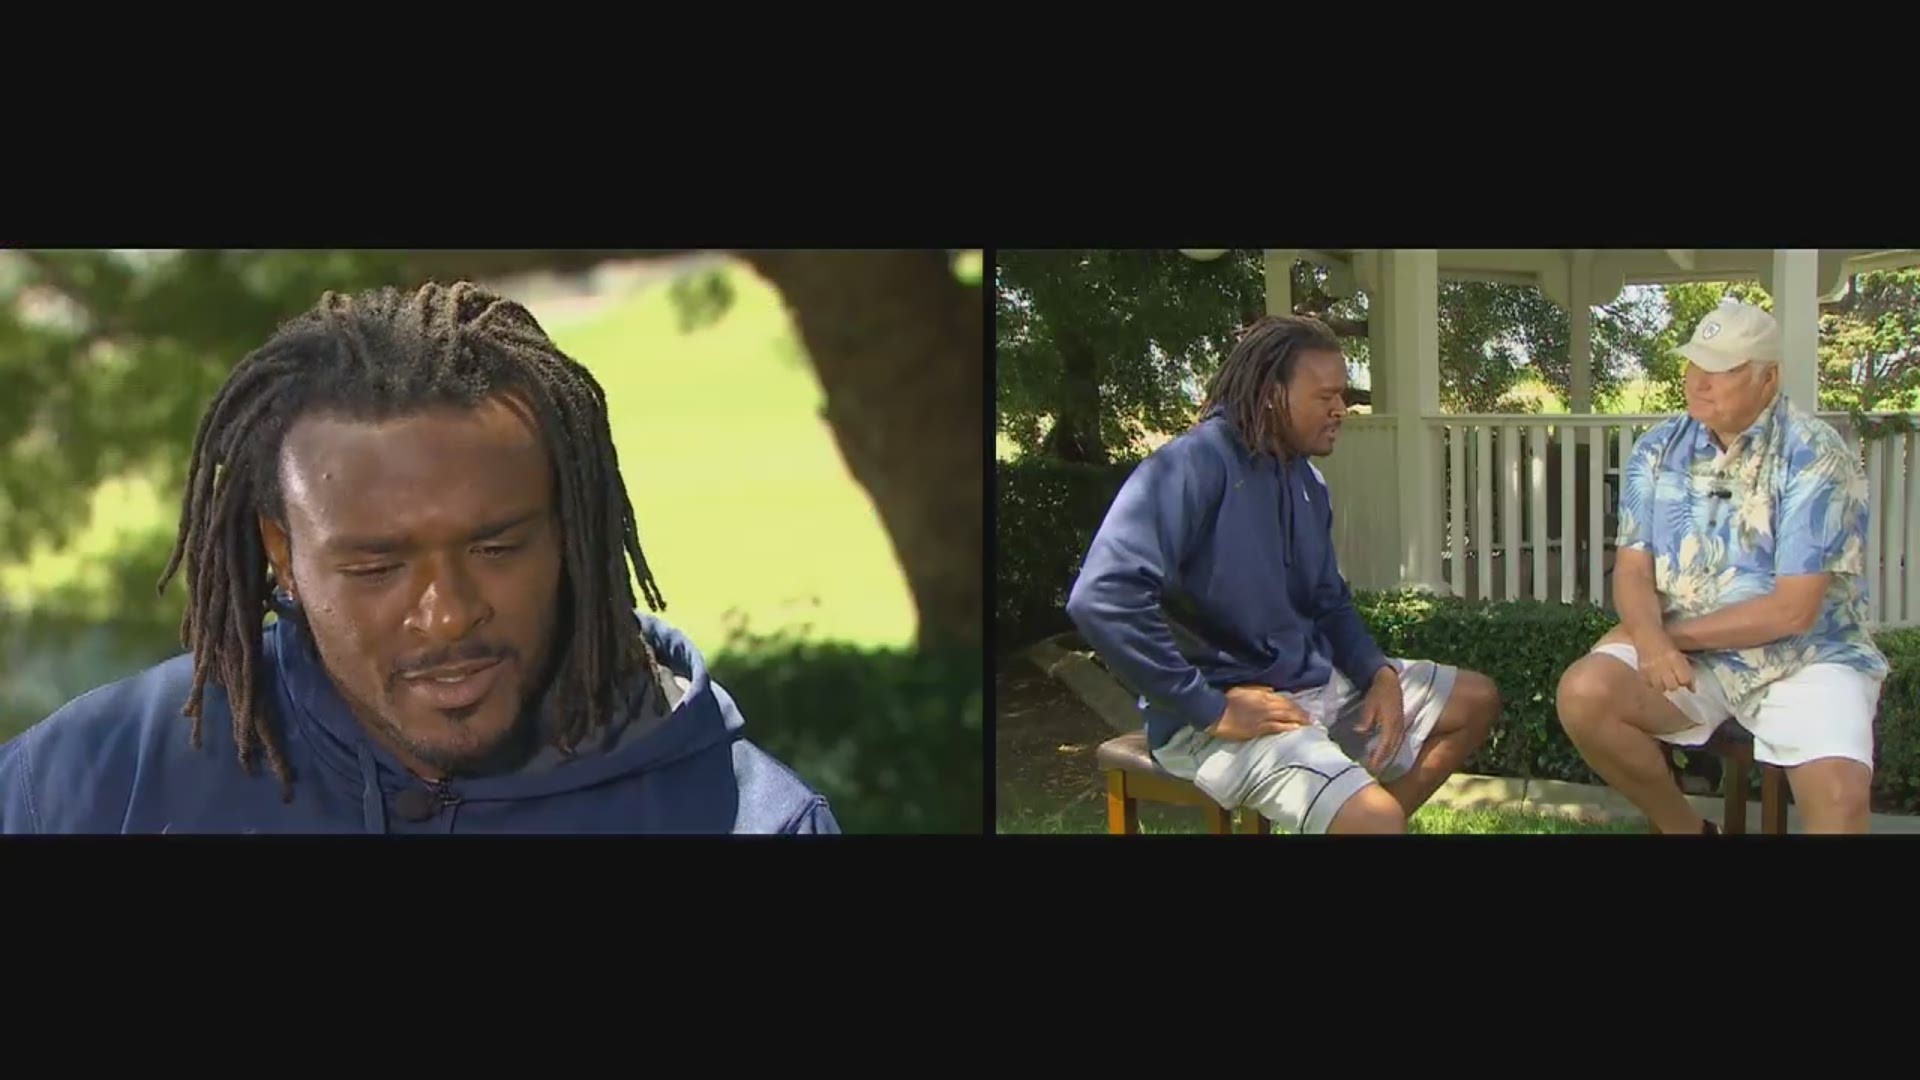 WFAA Sports' Dale Hansen sits down with Dallas Cowboys cornerback Brandon Carr from Cowboys Training Camp in Oxnard, Calif.